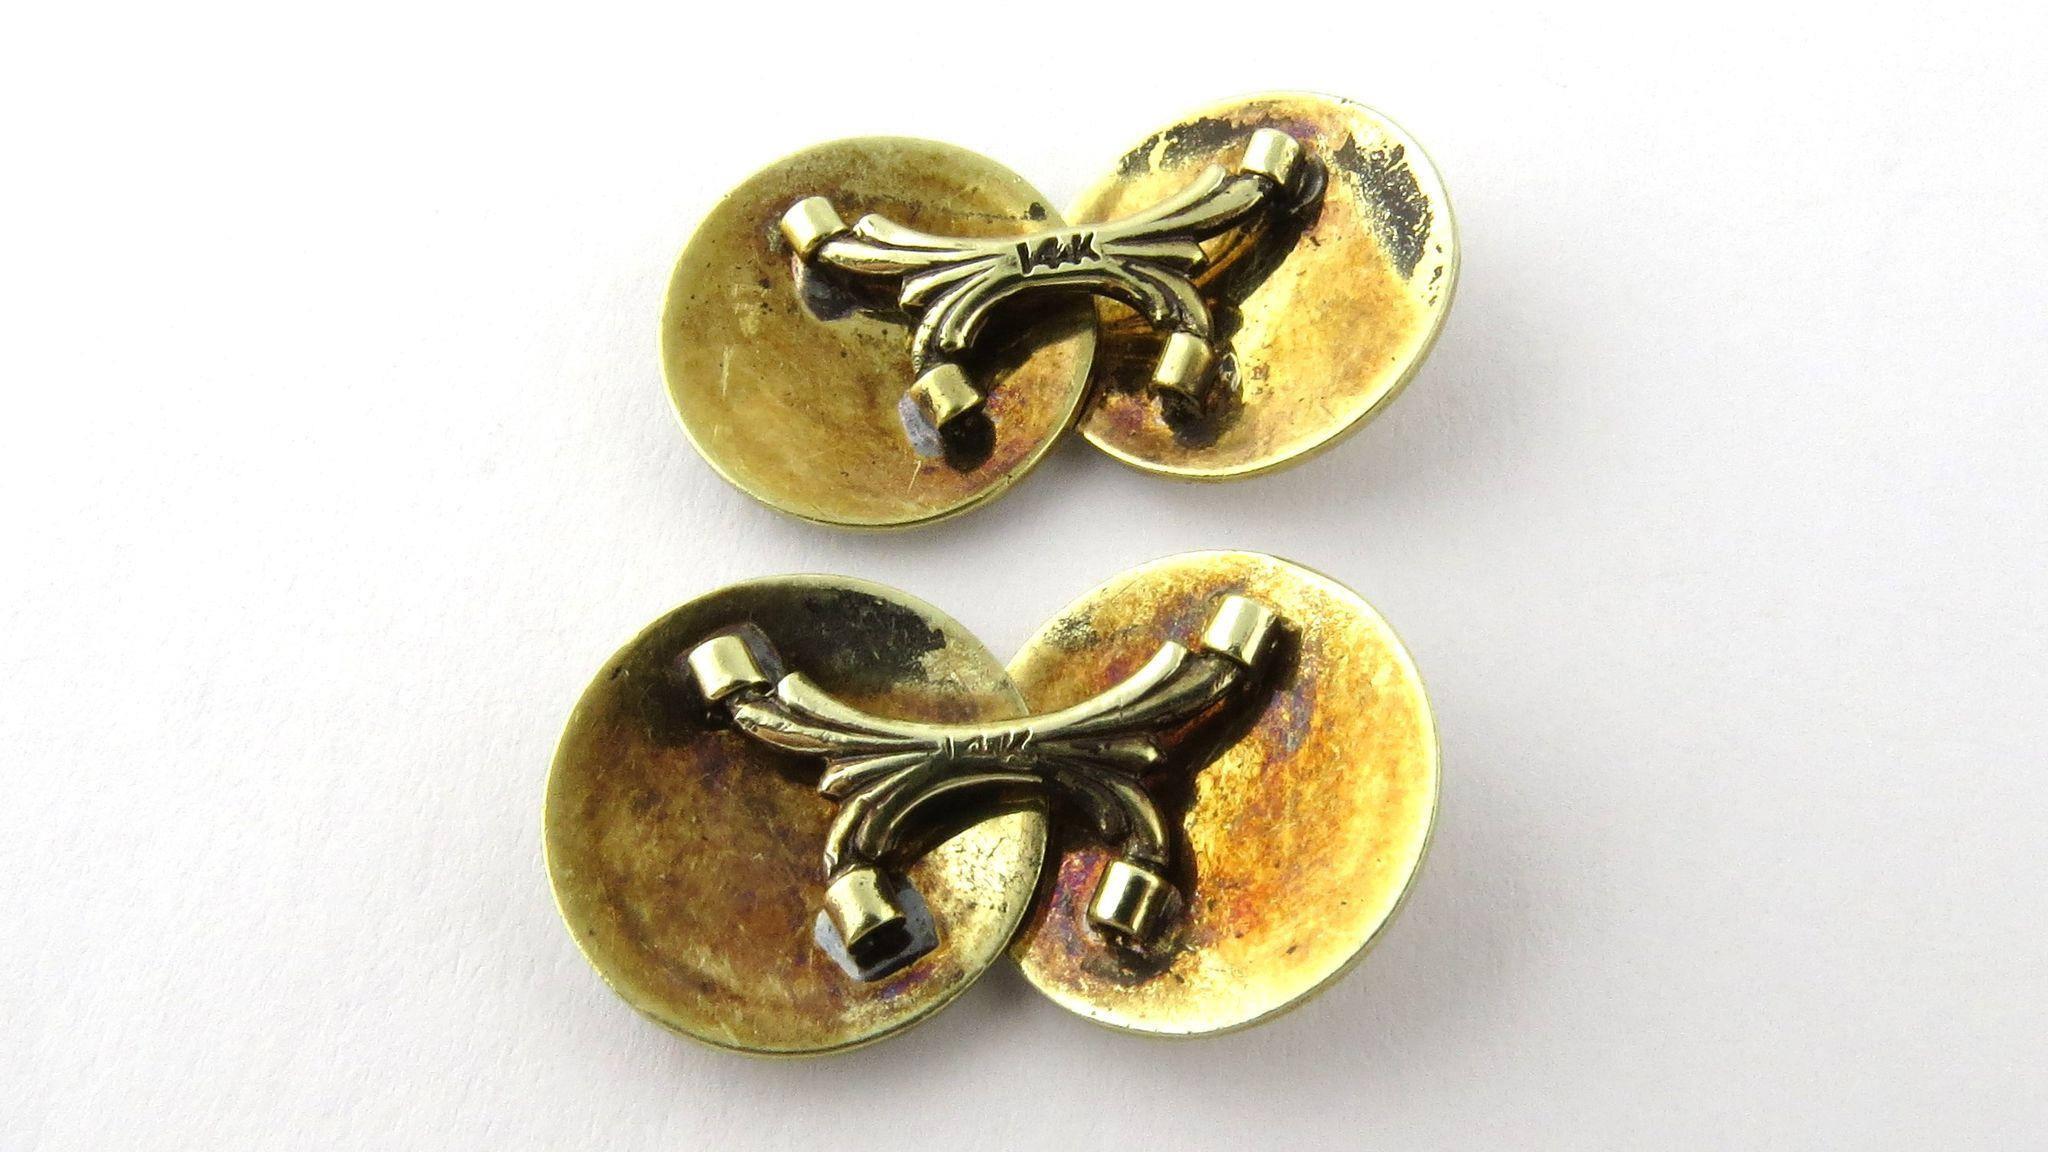 Men's Art Deco 14 Karat White and Gold Two-Toned Engine Turned Cufflinks